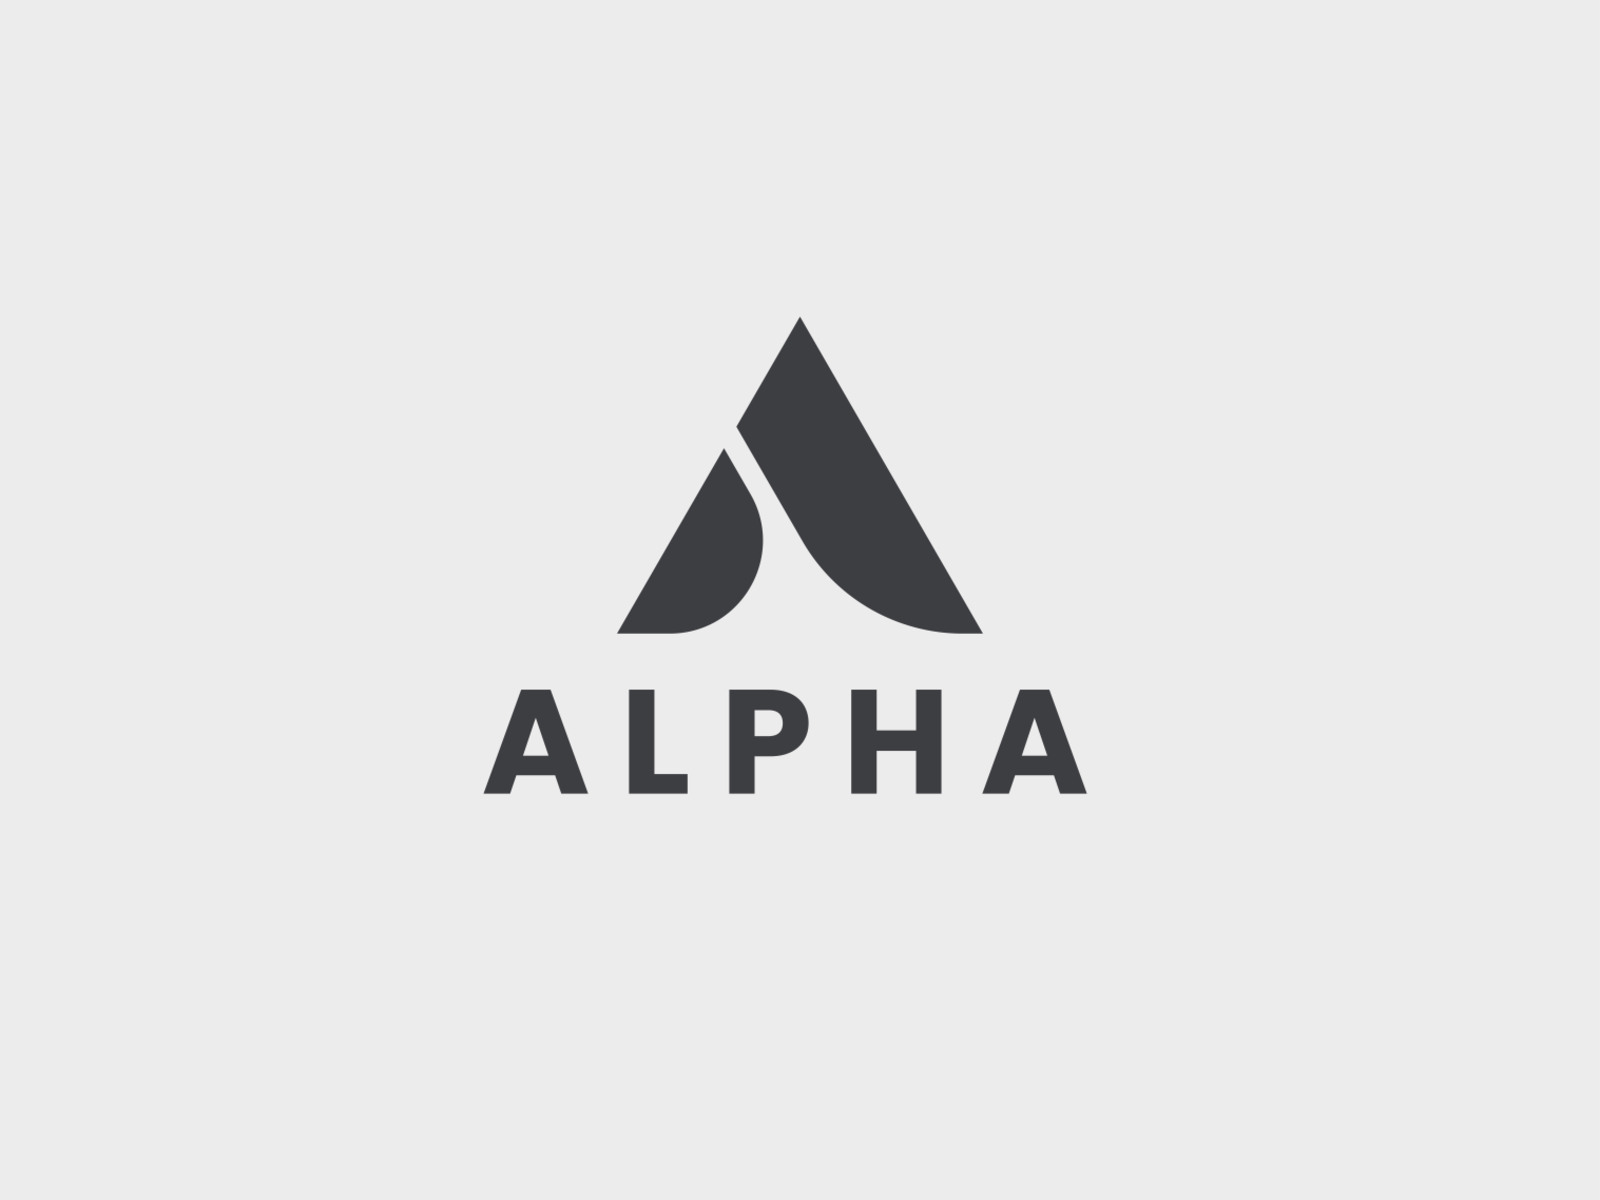 Alpha Industries Logo and symbol, meaning, history, PNG, brand